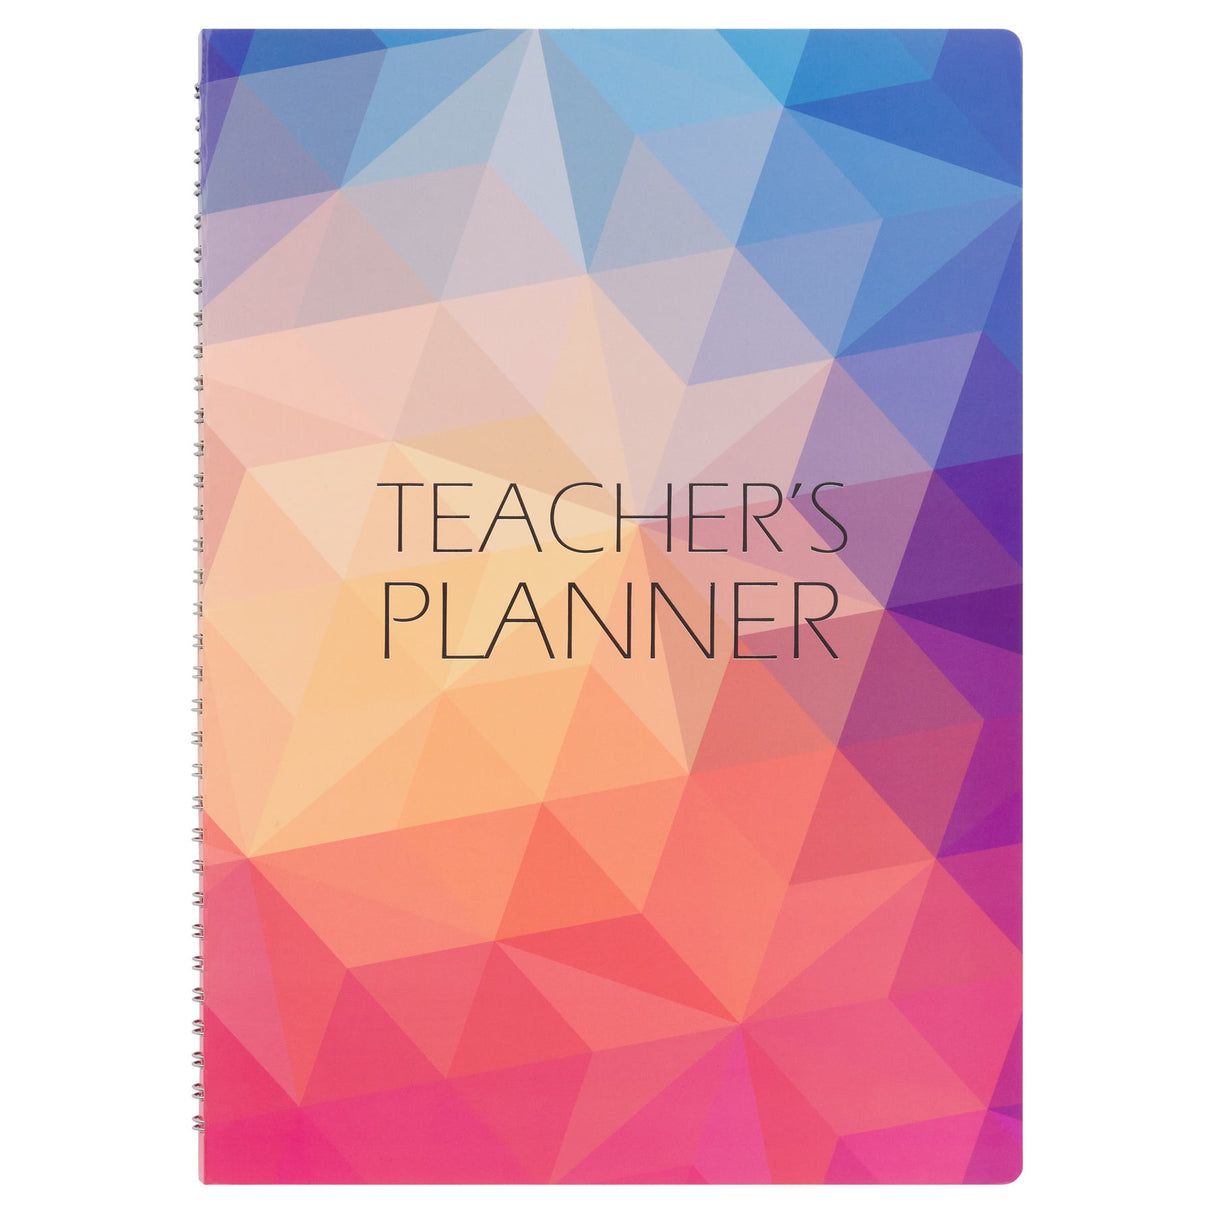 Student Solutions A4 Teacher's Planner - Bright | Stationery Shop UK